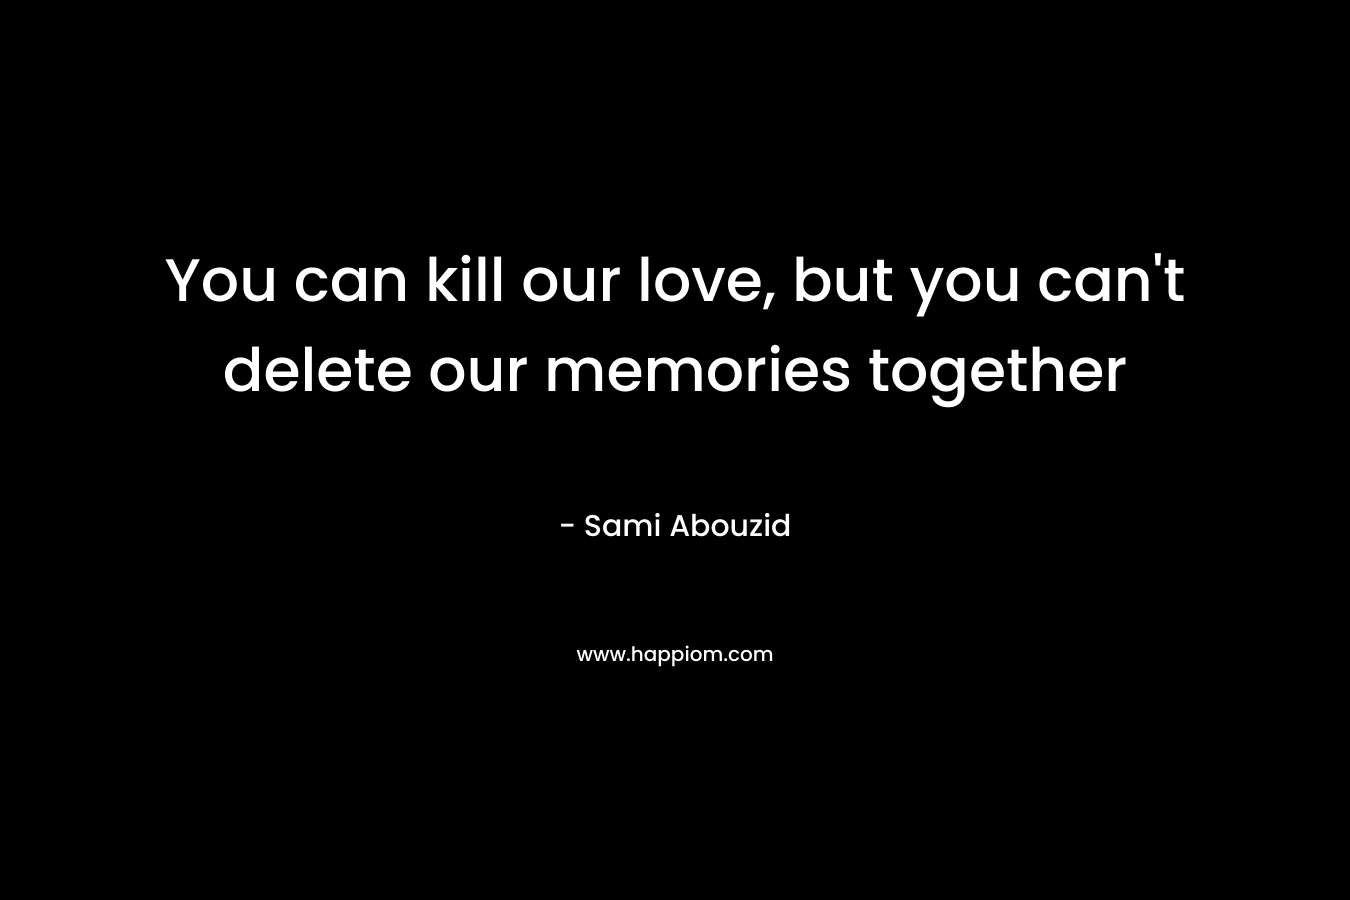 You can kill our love, but you can't delete our memories together